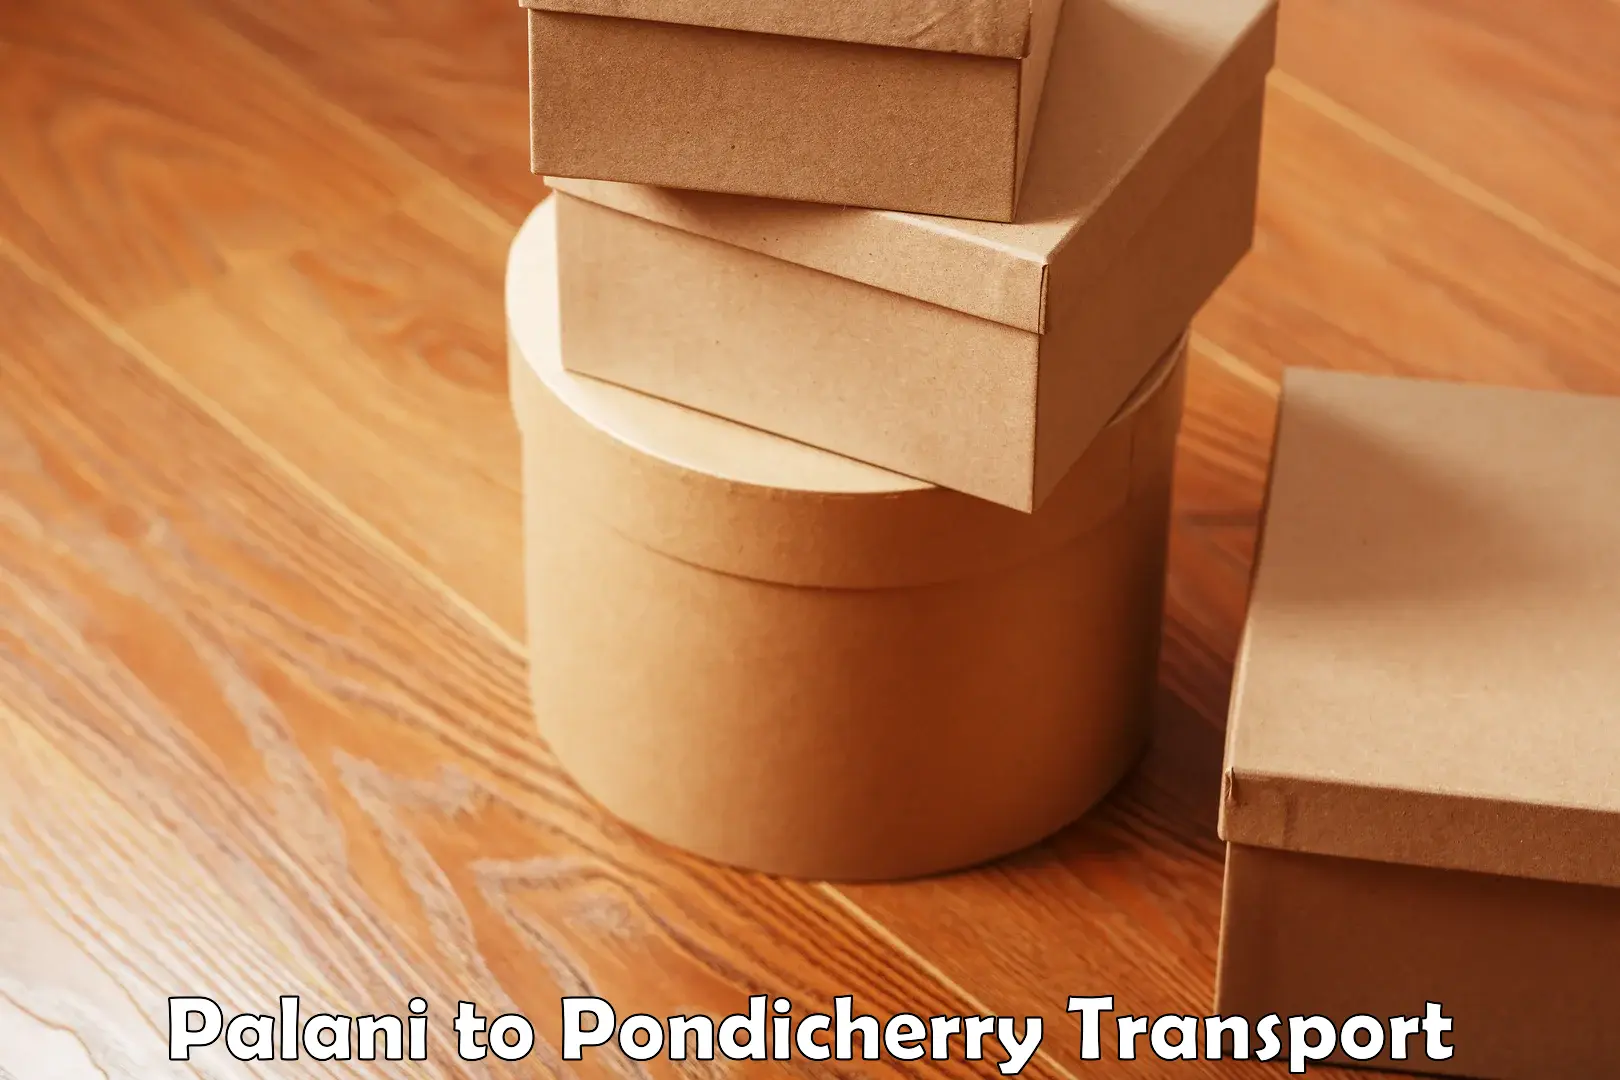 Truck transport companies in India Palani to Pondicherry